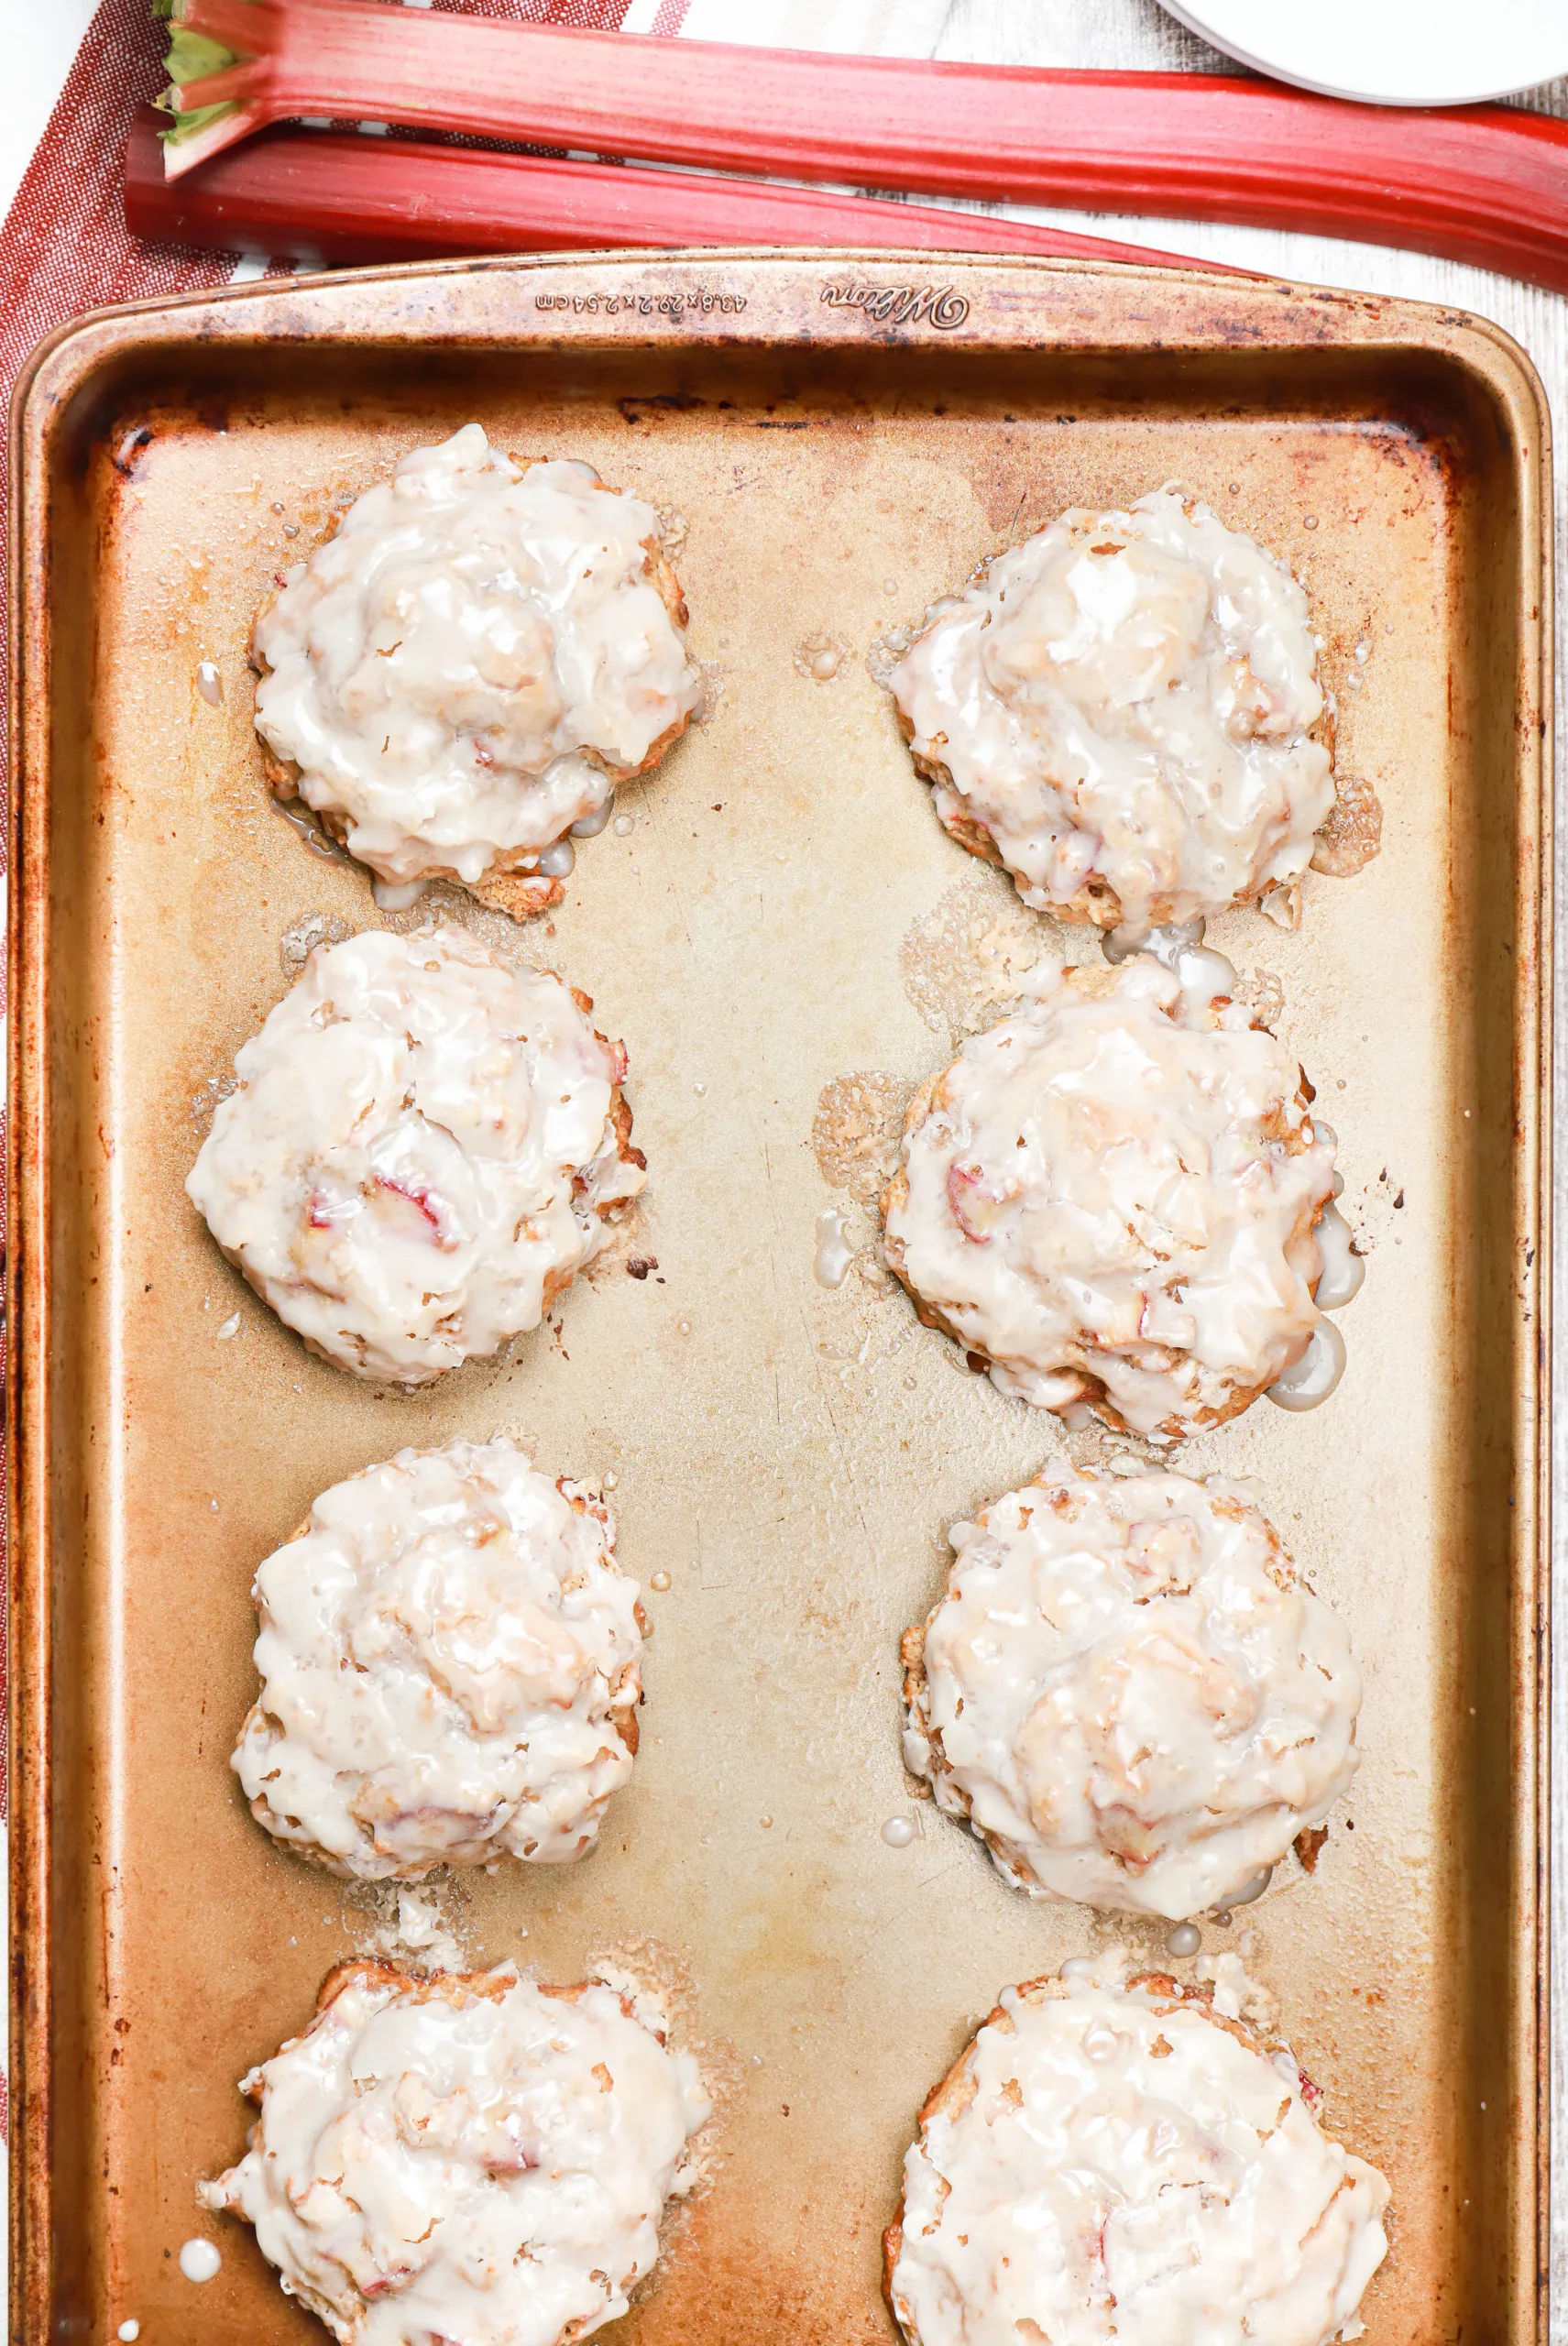 Overhead view of a batch of baked rhubarb fritters on an aluminum baking sheet.